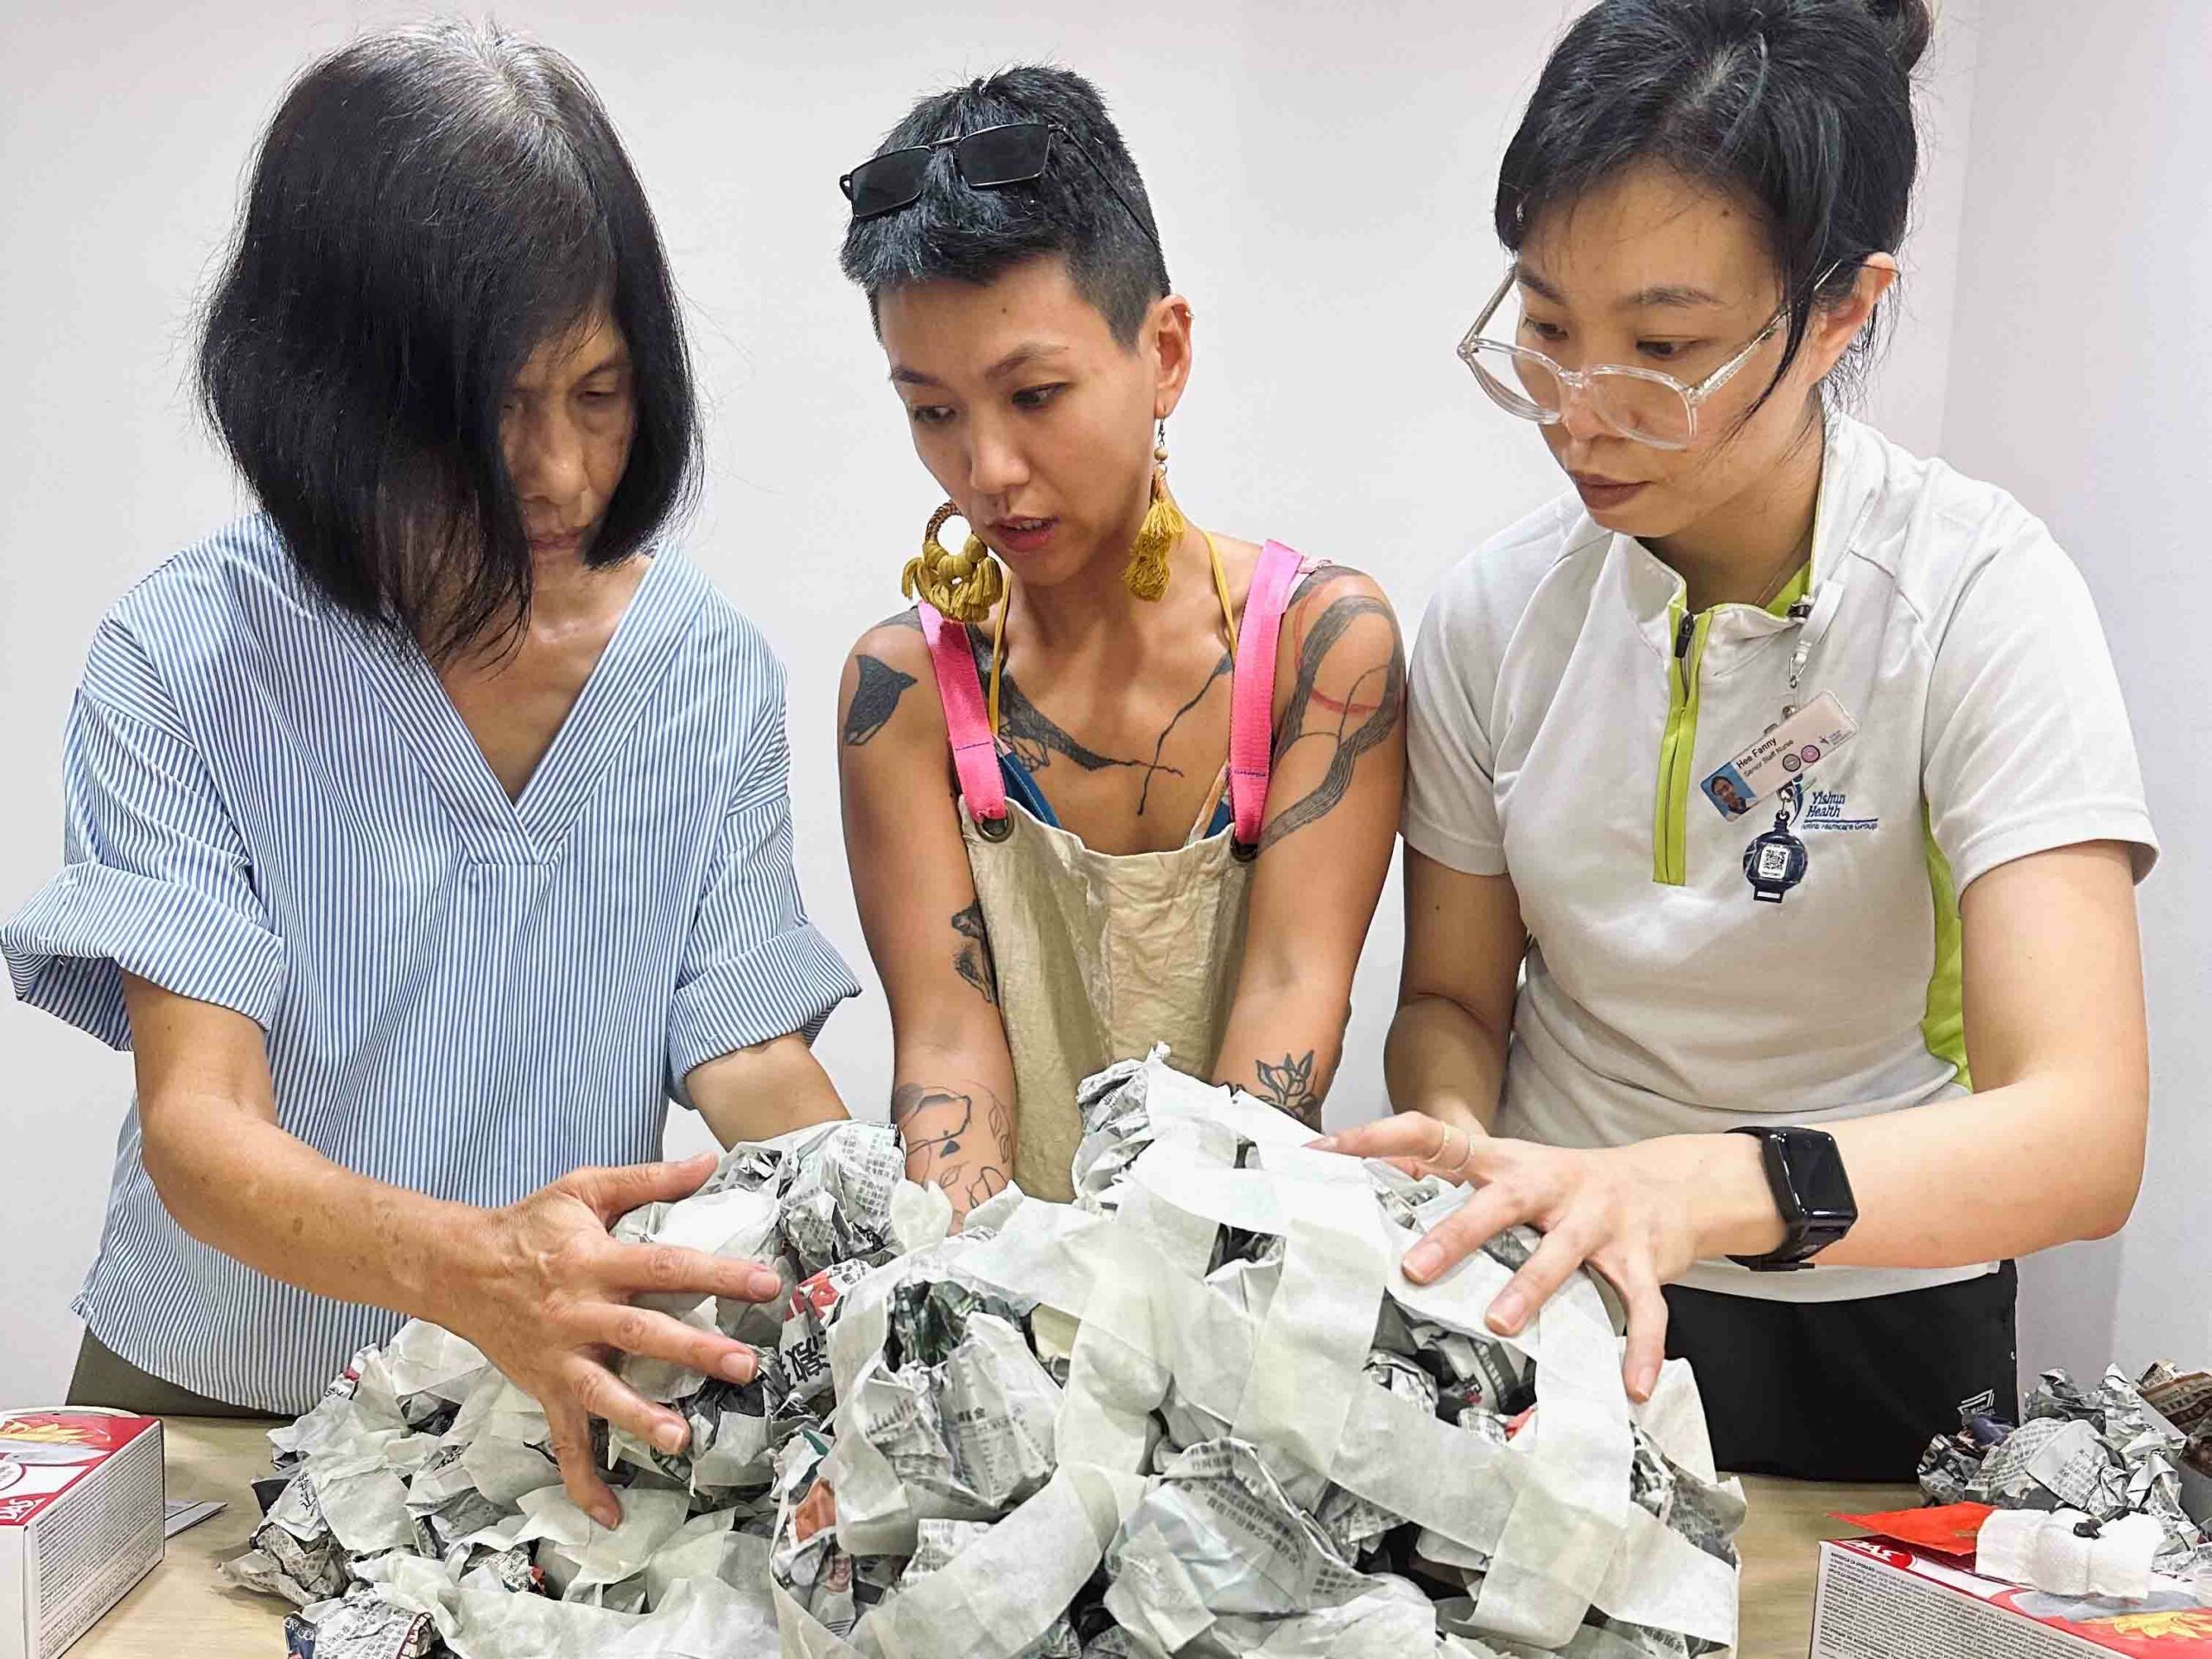 Agnes, Stacy and a Yishun Health staff member working on paper mache sculptures that make the structure of umbilical cords, where heirlooms are Agnes' focus on end-of-life matters.